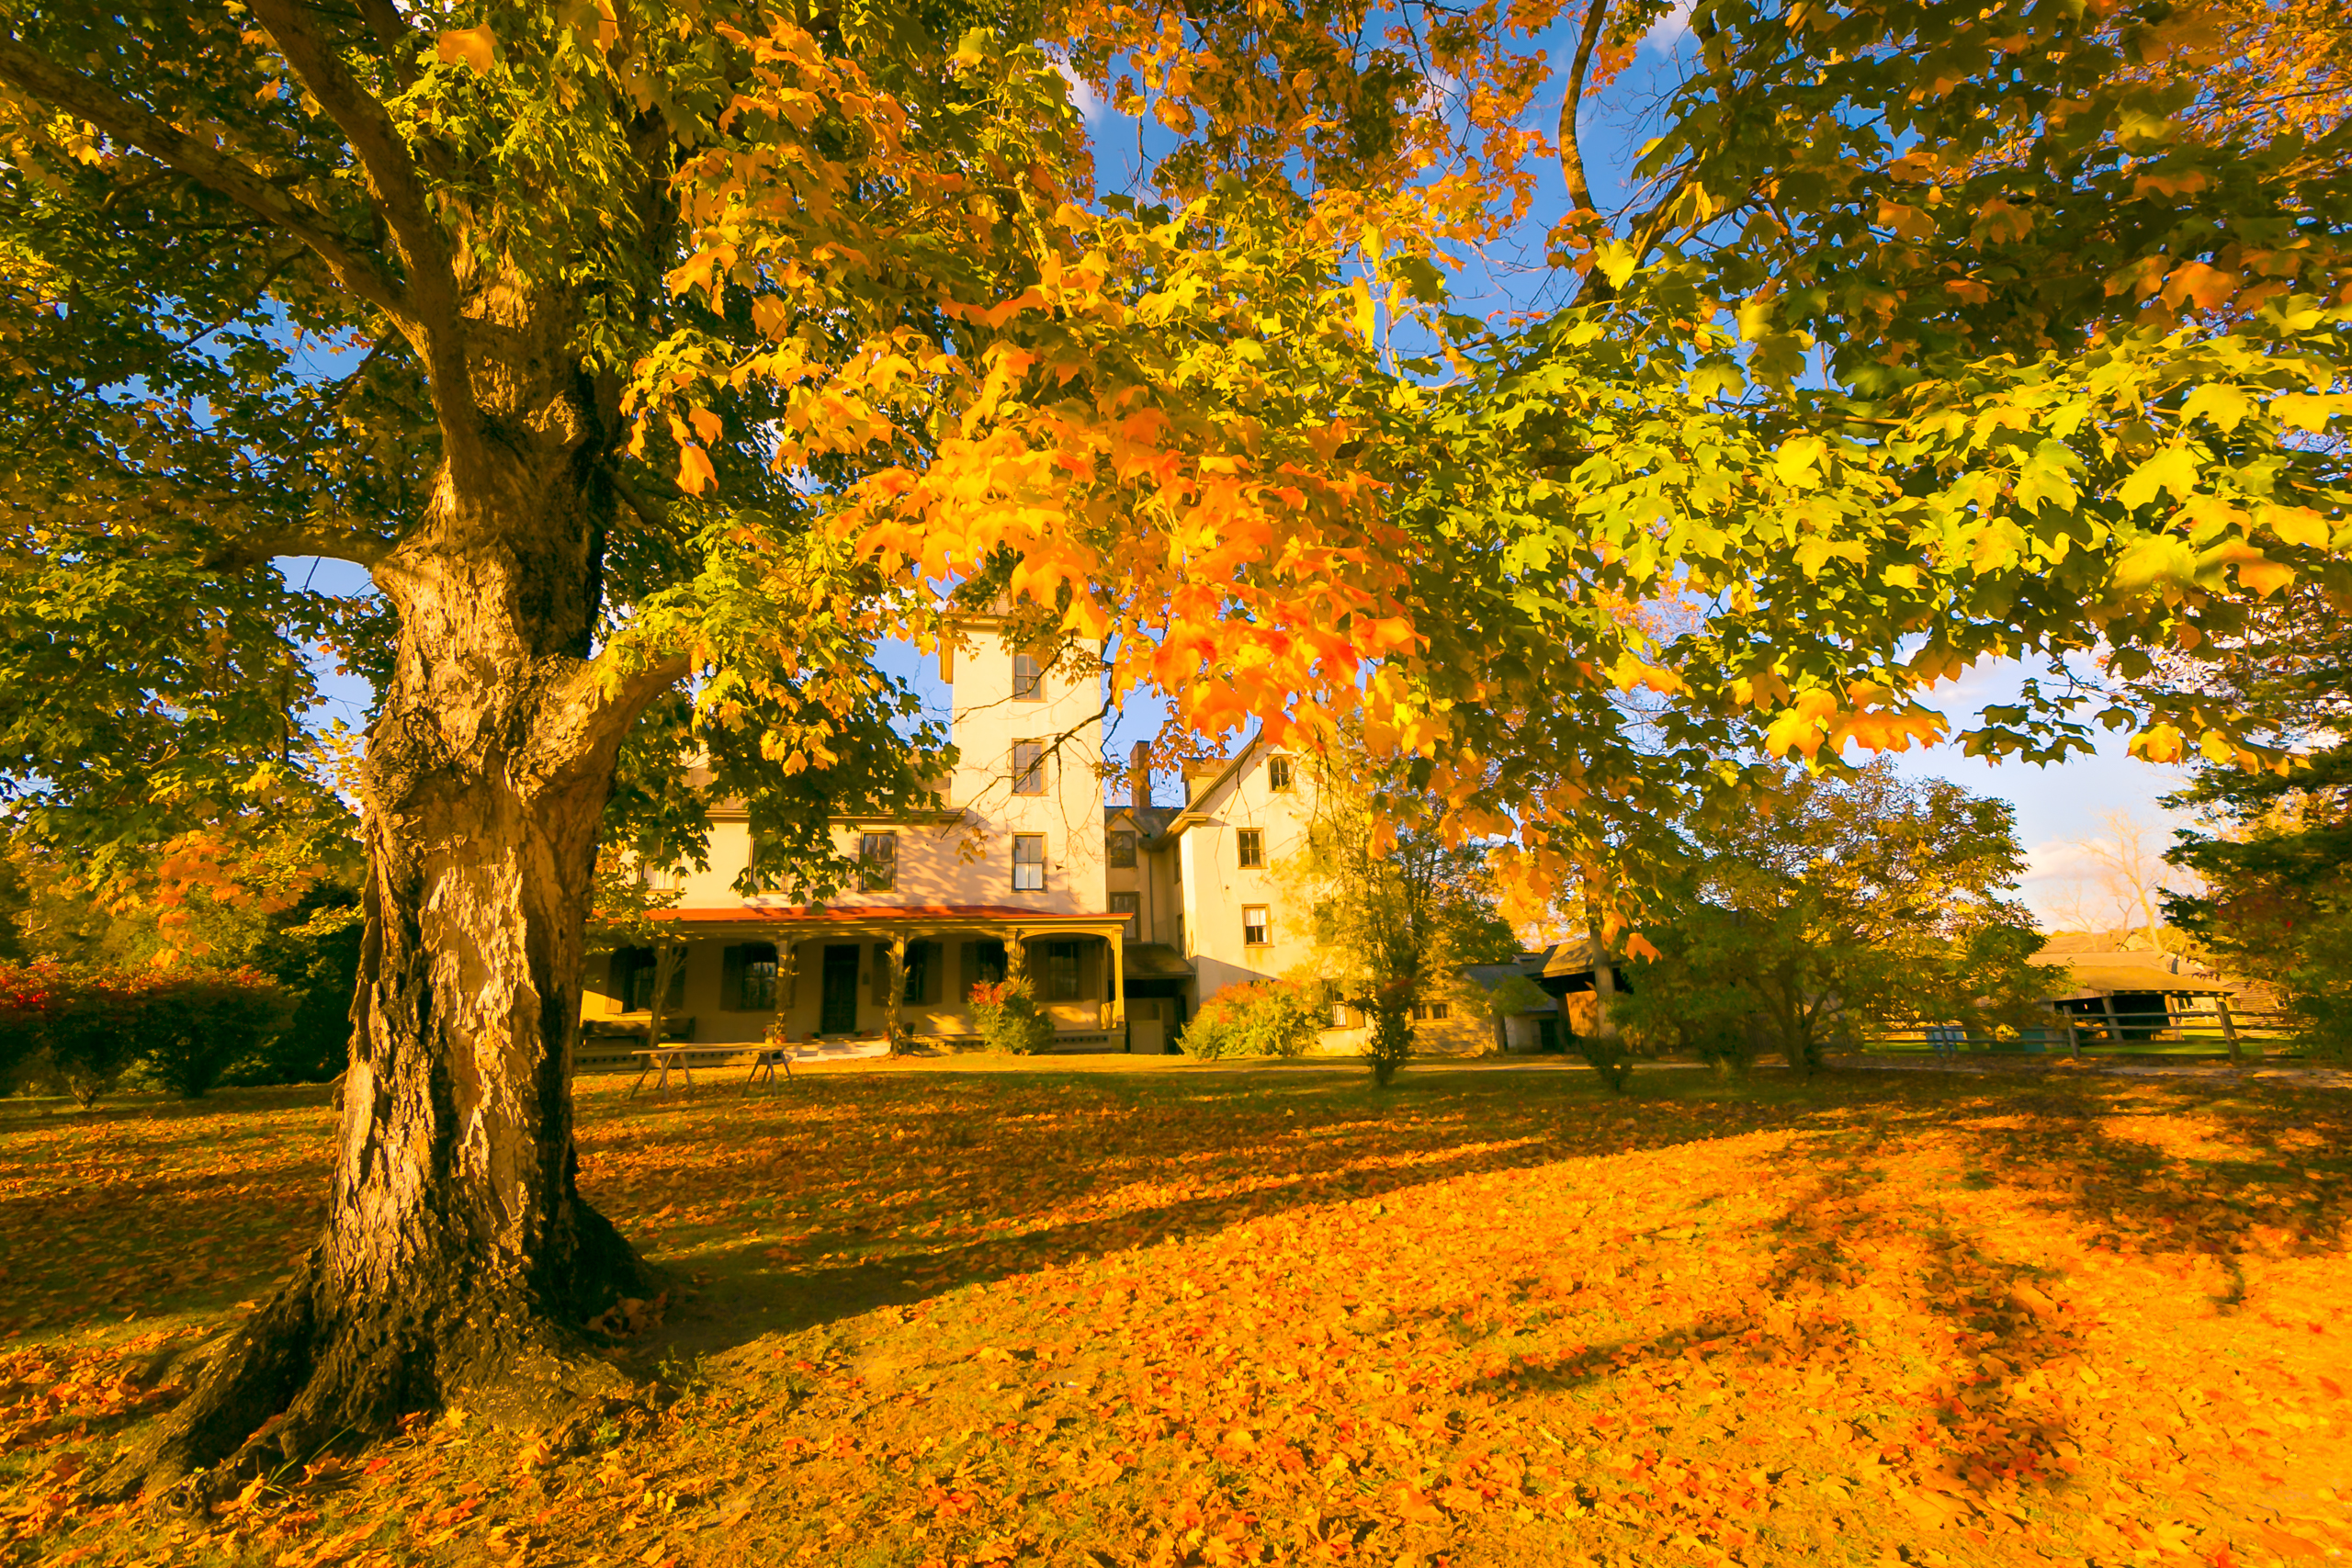 A golden hour HDR photograph of the Batsto Village Mansion framed behind a large maple tree ablaze in Fall color orange leaves